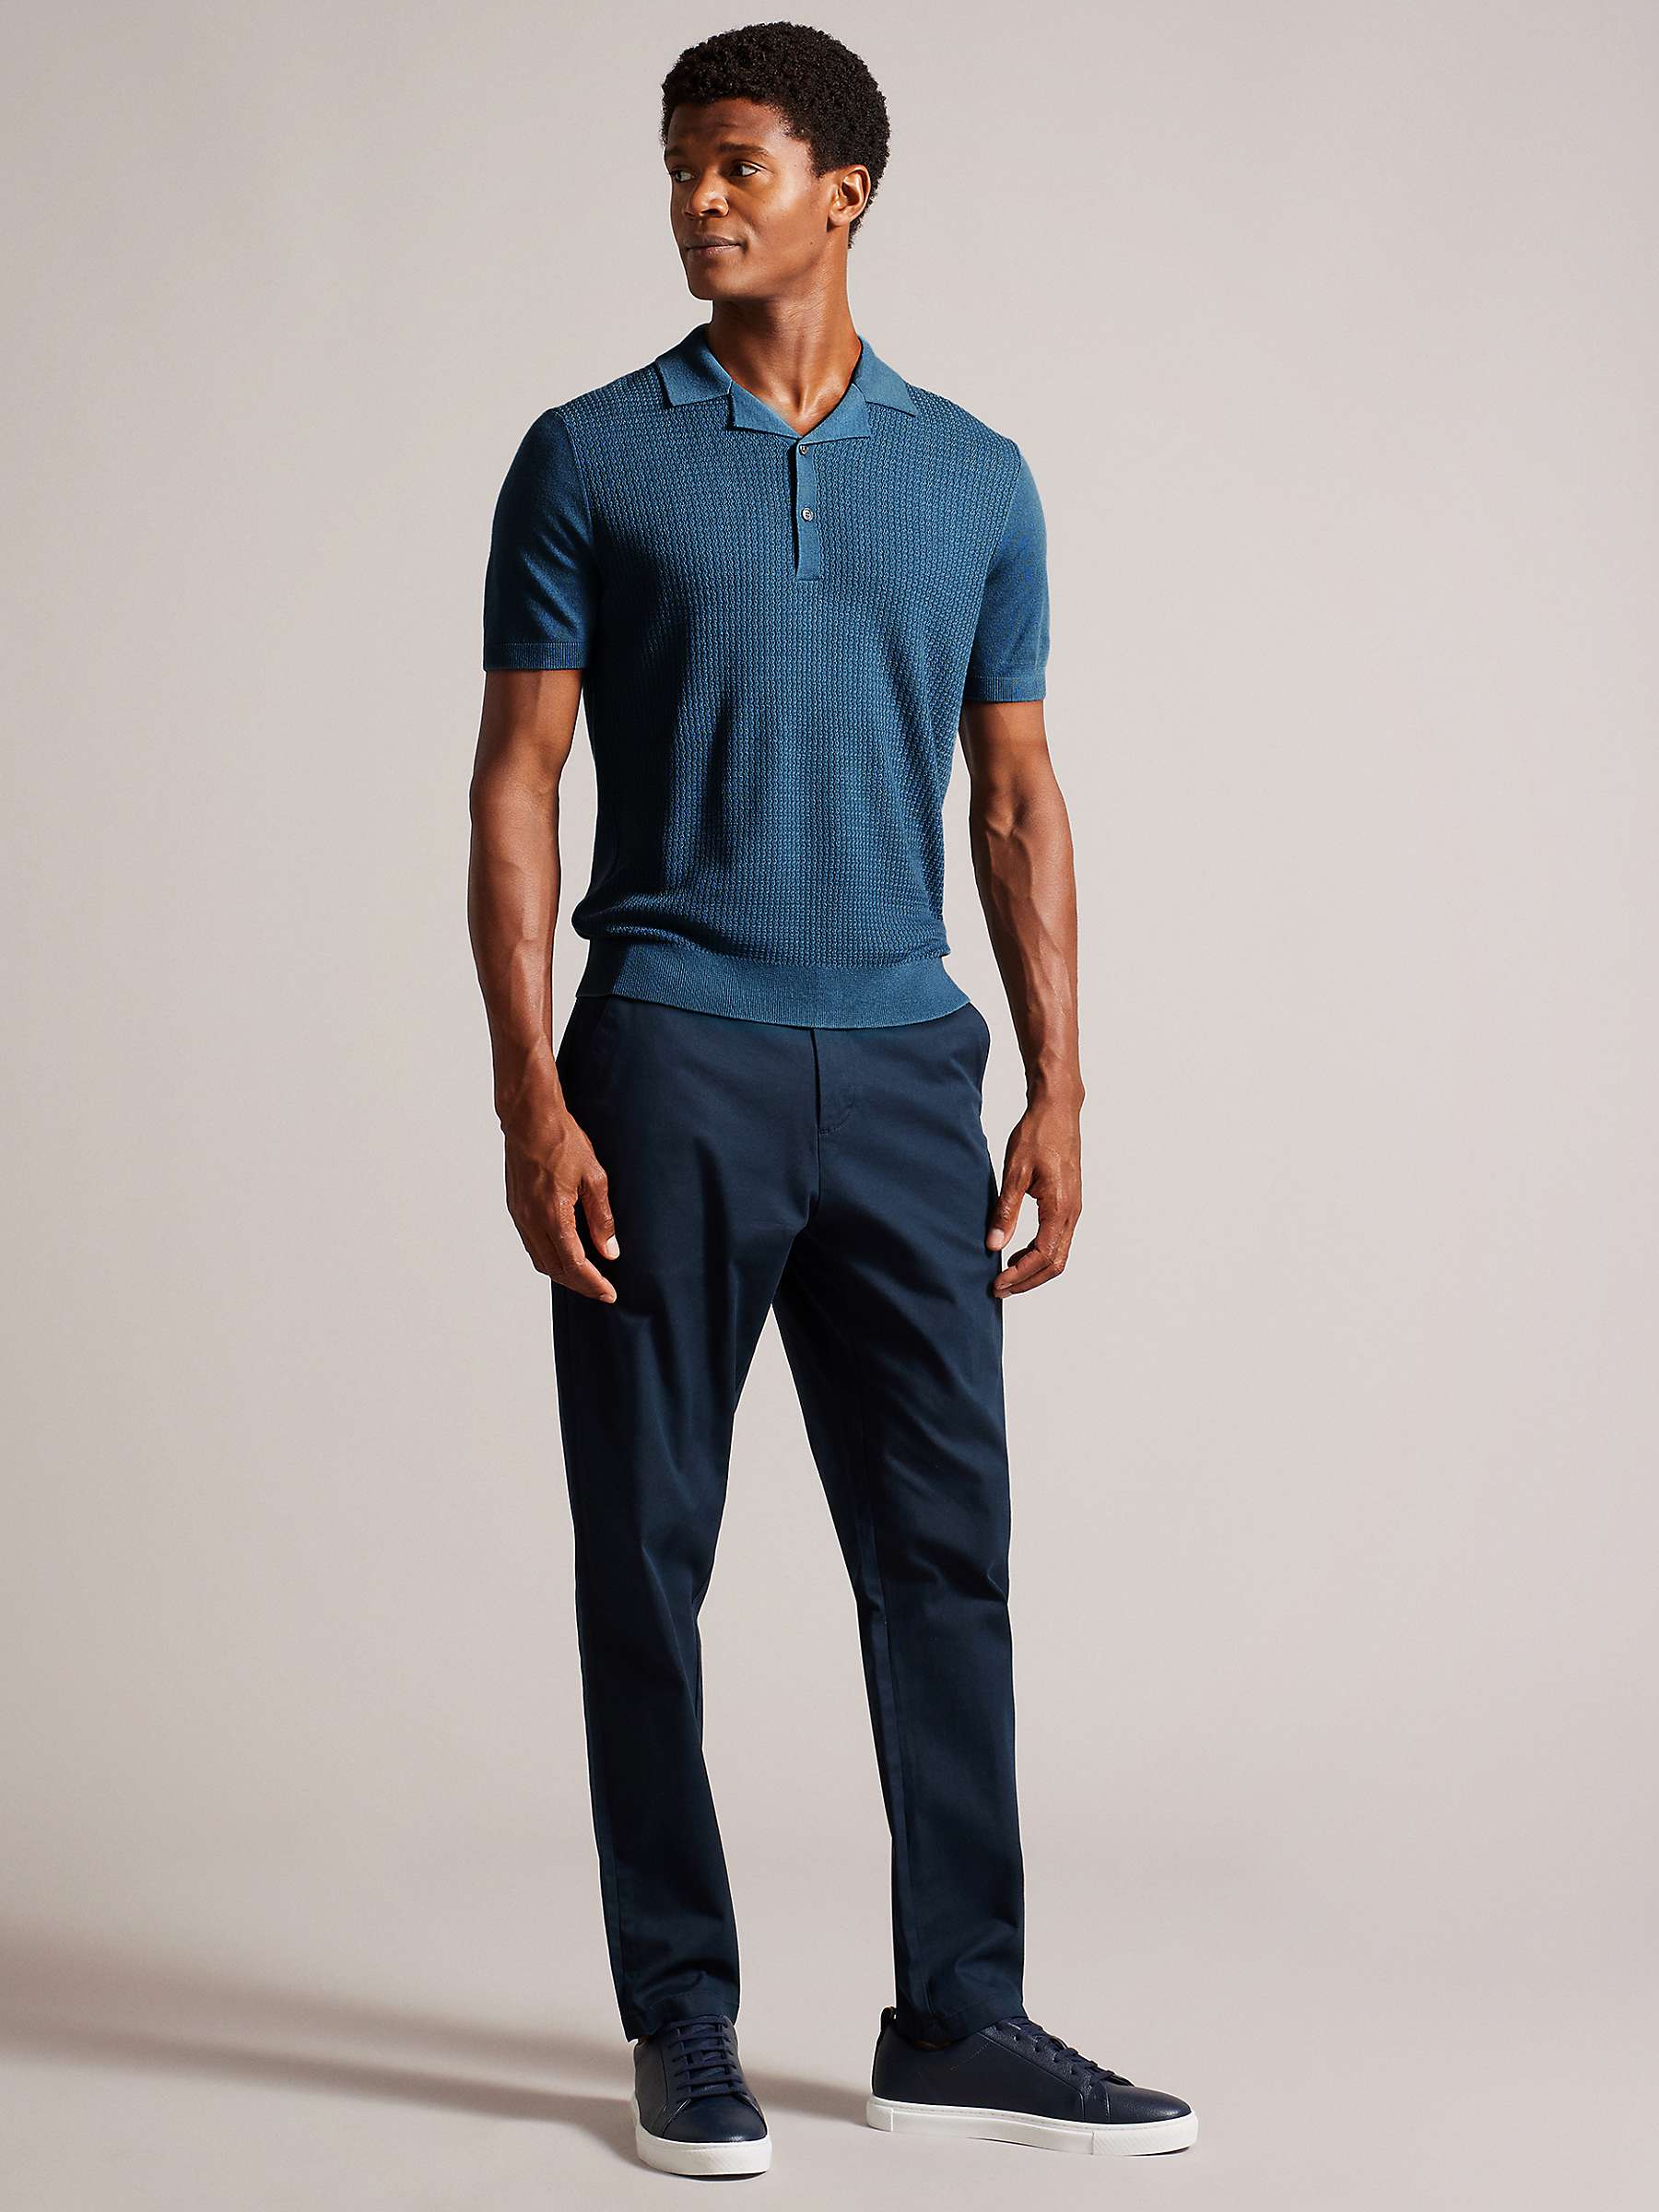 Ted Baker Adio Short Sleeve Textured Polo, Blue Teal at John Lewis ...